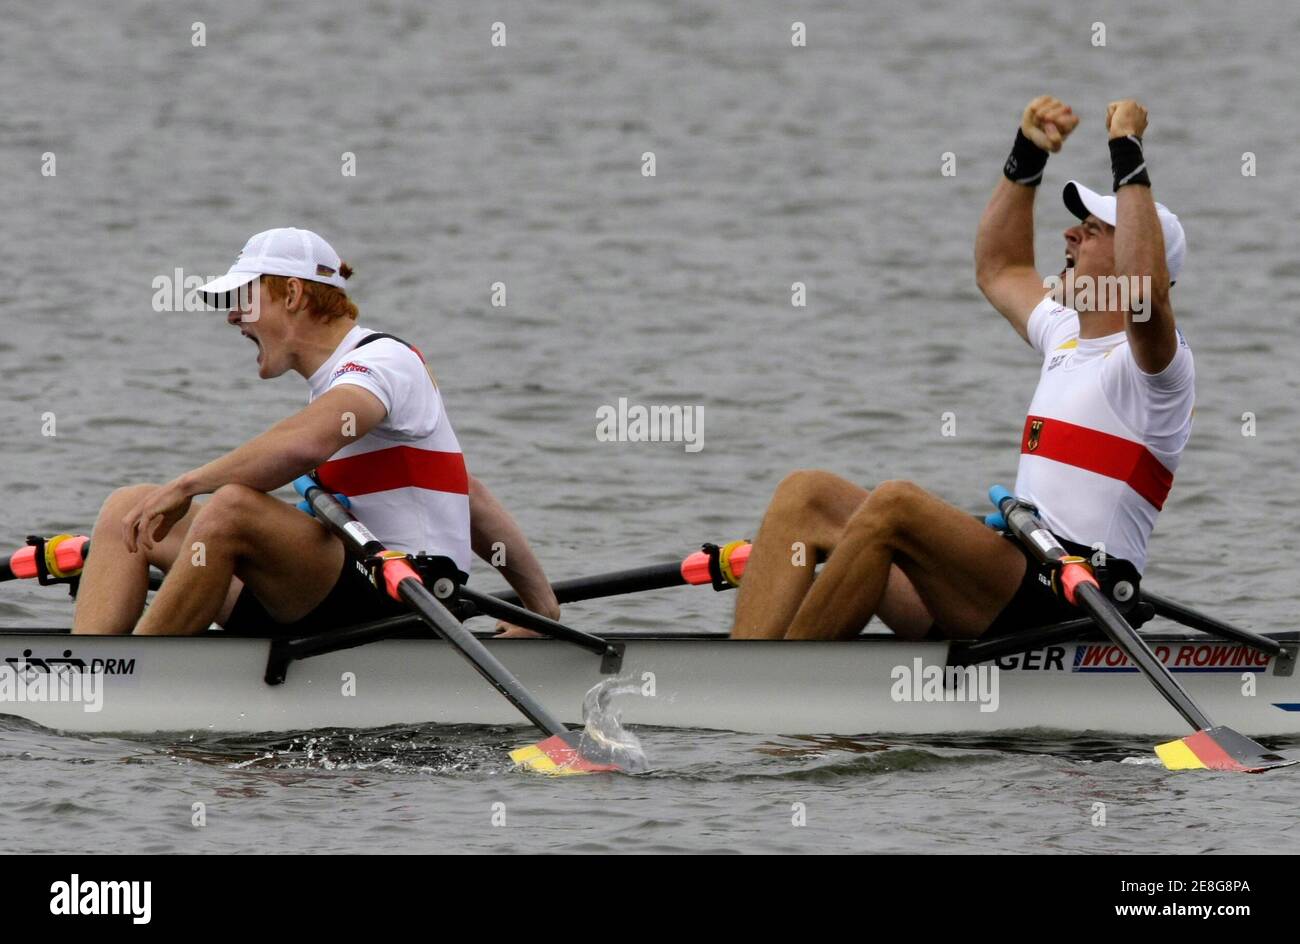 Eric Knittel and Stephan Krueger (R) of Germany celebrate after winning in the men's double sculls final during the World Rowing Championships in Poznan August 29, 2009. REUTERS/Peter Andrews (POLAND S SPORT ROWING) Stock Photo